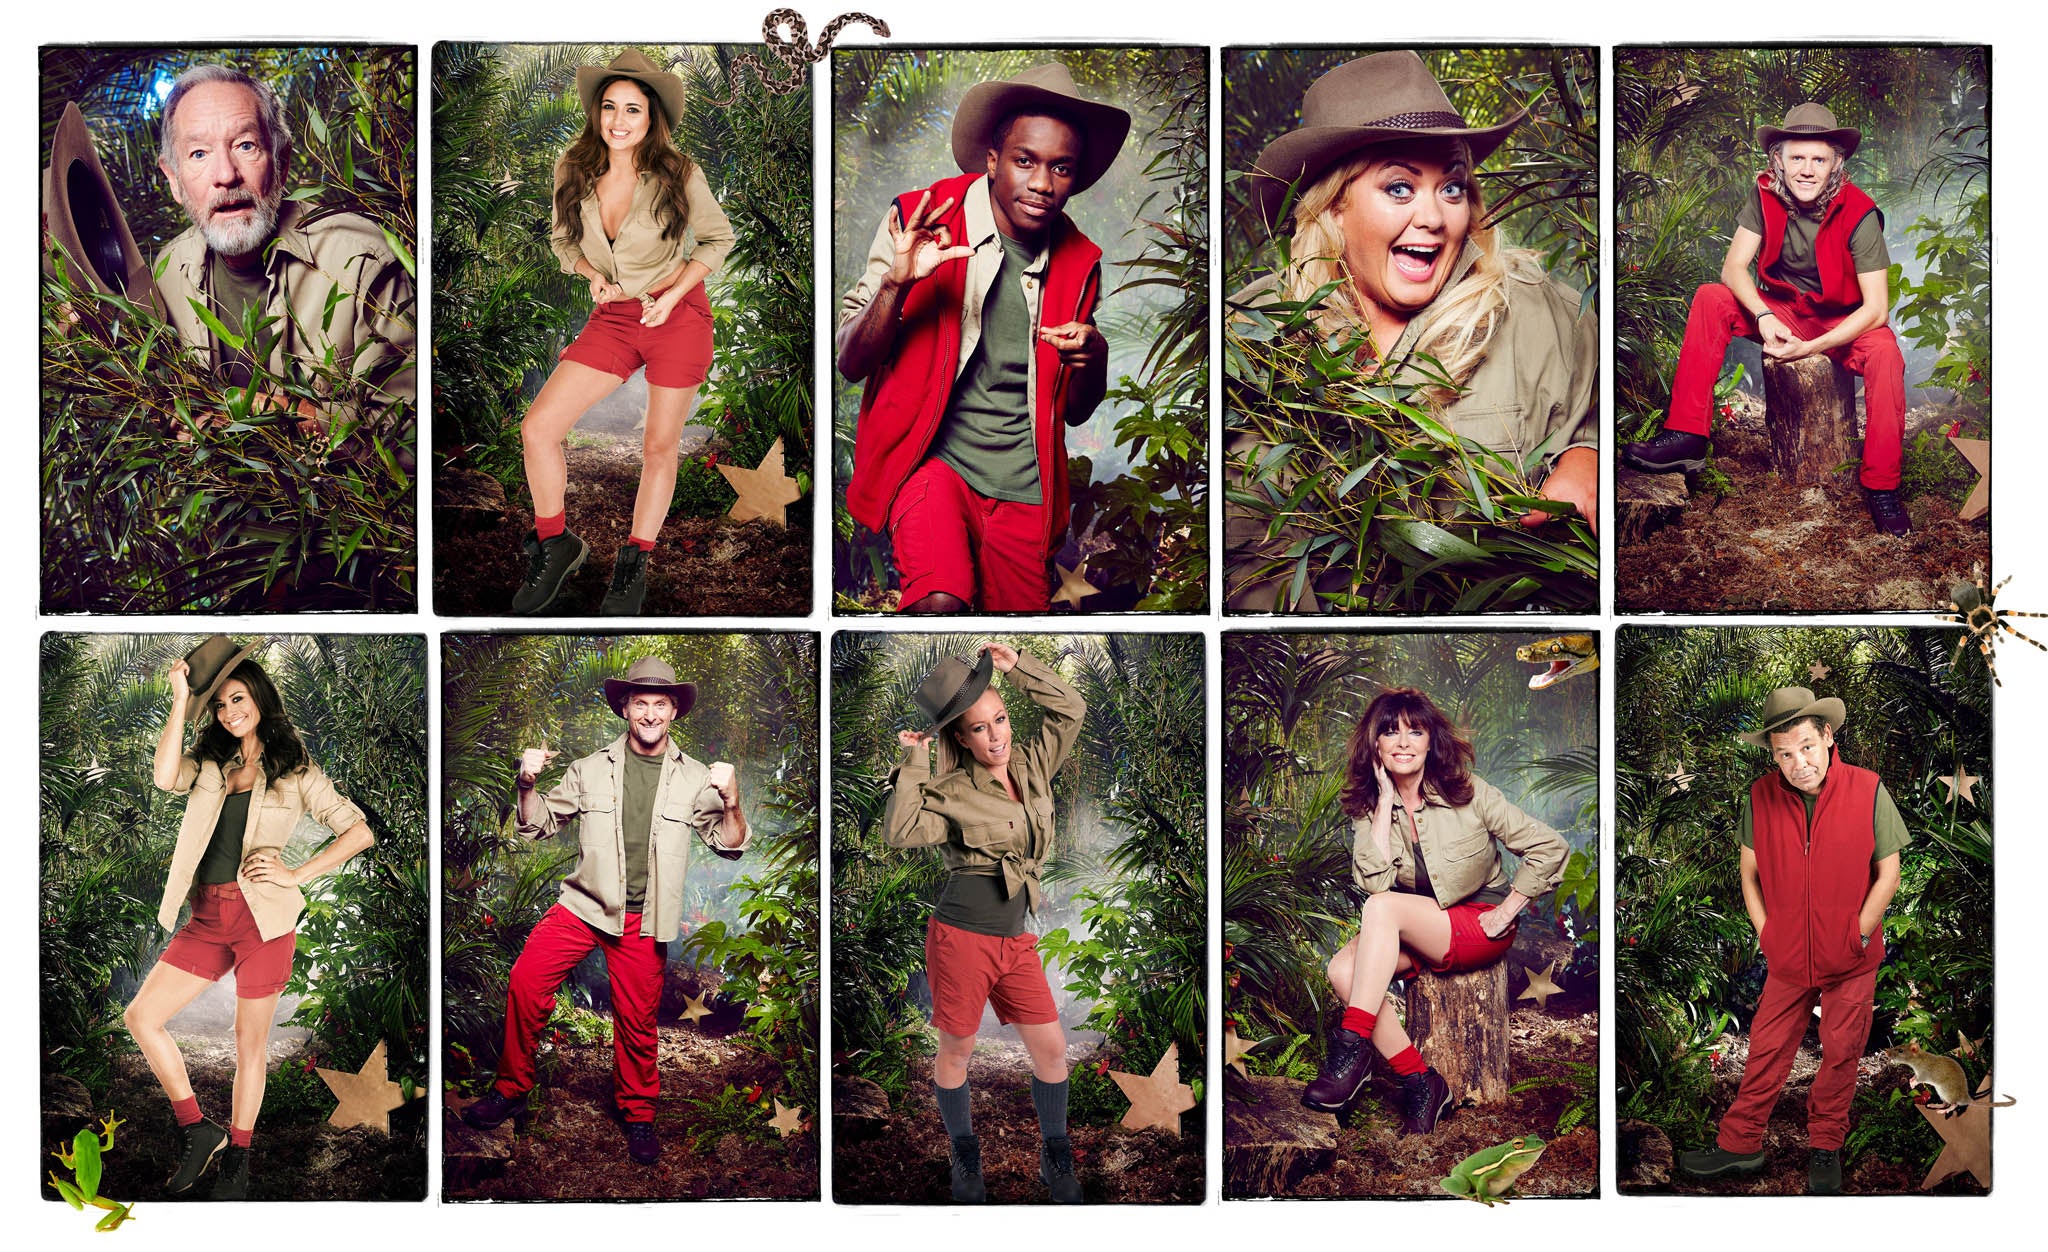 This year's batch of I'm A Celebrity contestants